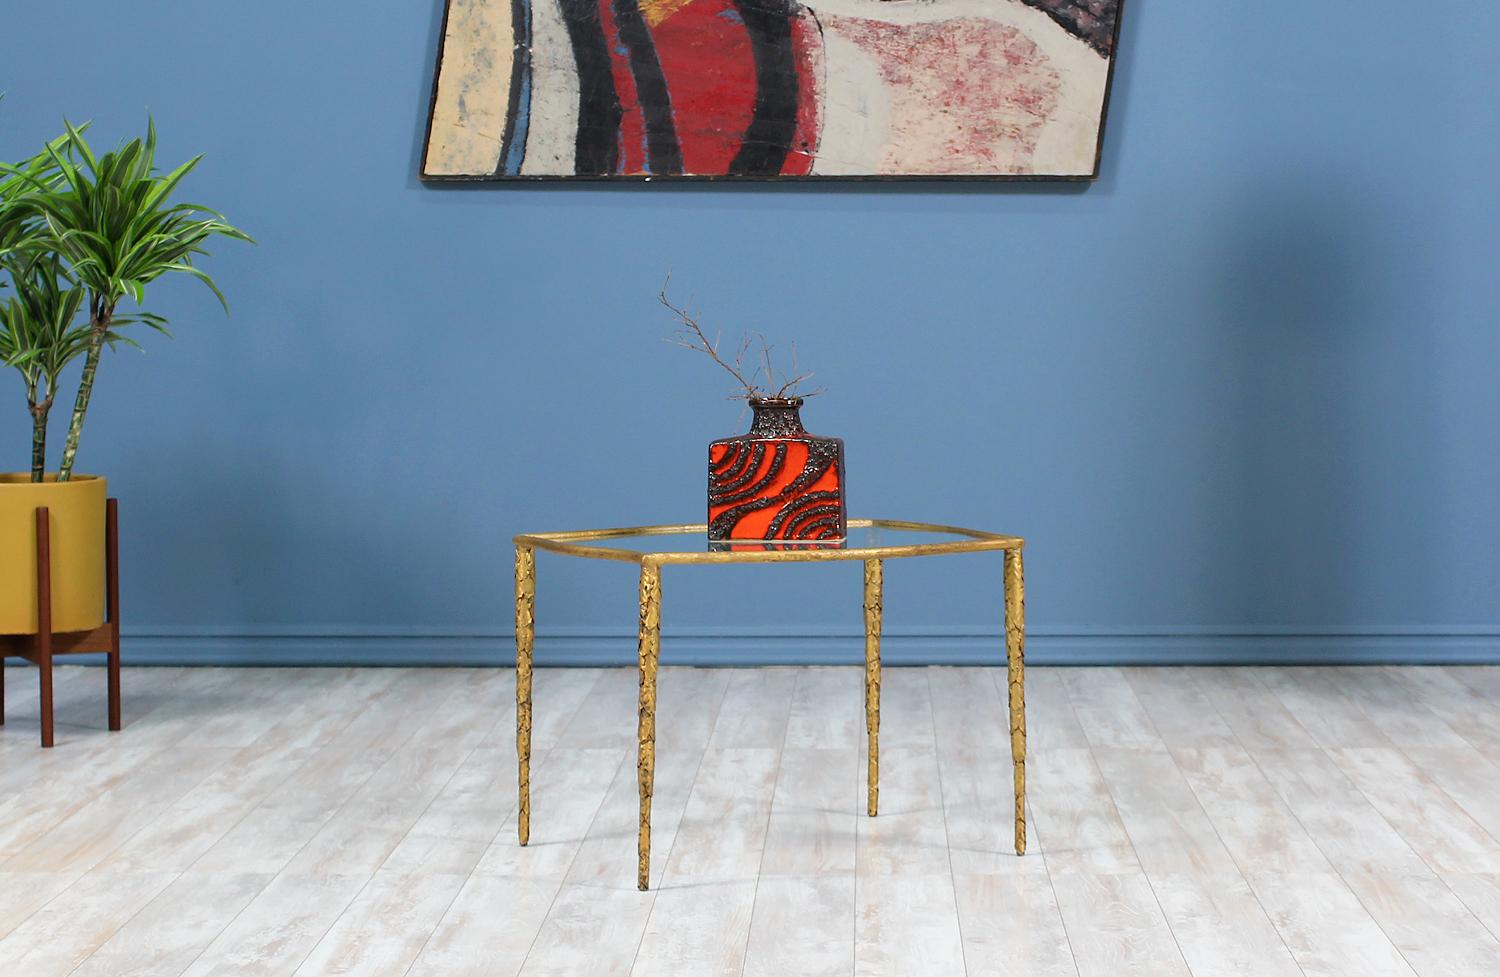 Mid Century Brutalist side table designed and manufactured in the United States circa 1960’s. This beautiful side table features a gilded metal structure in the fascinating brutalist style that supports the new custom glass top. The brass-toned